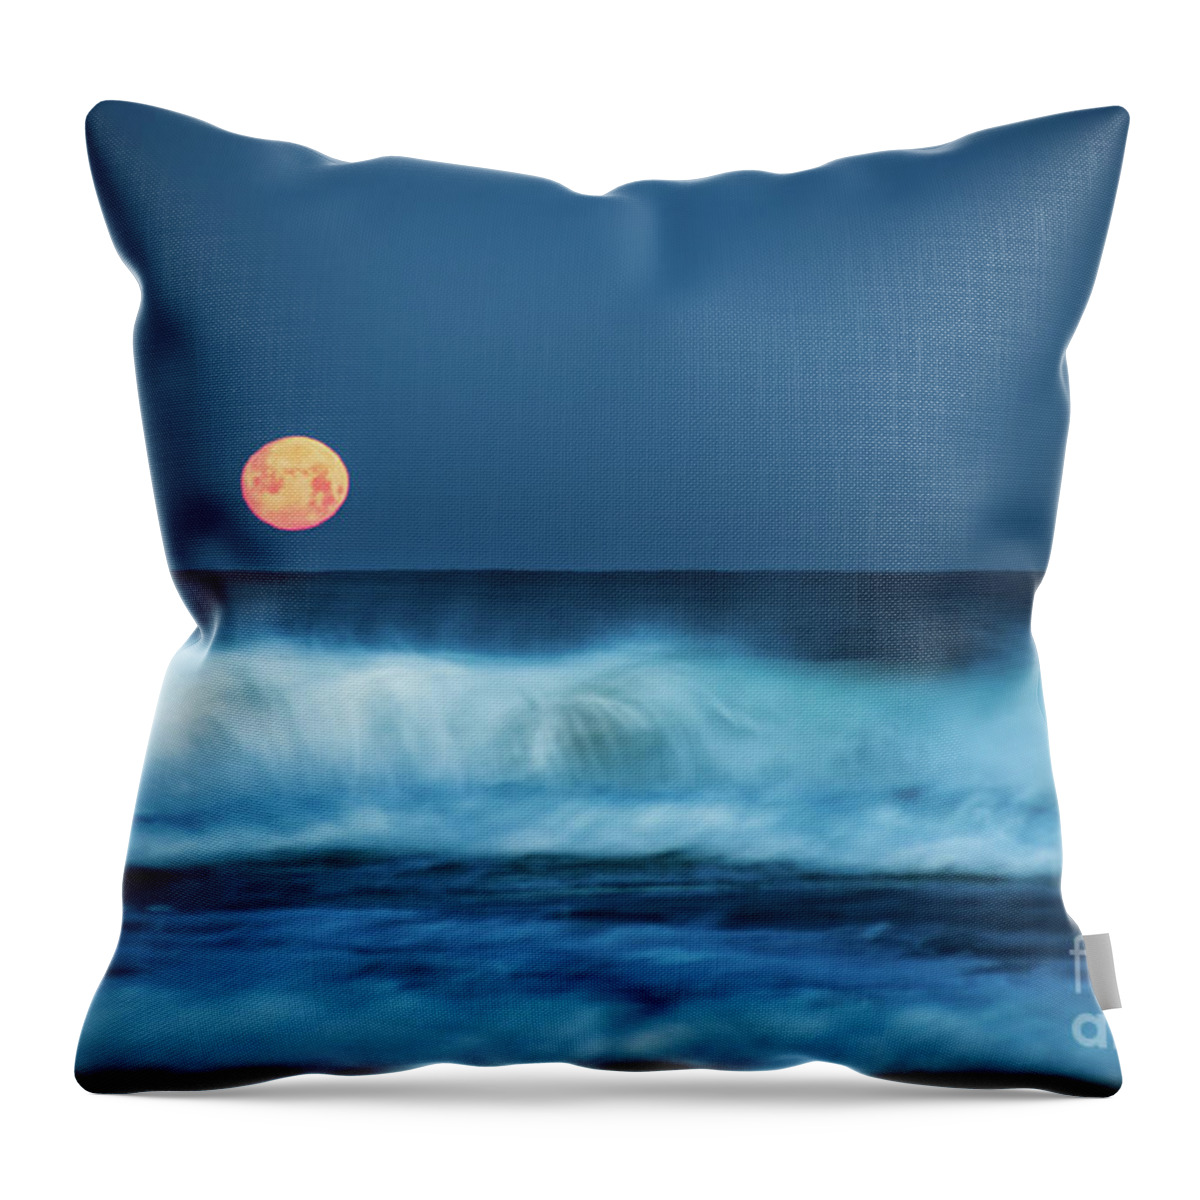 Moon Throw Pillow featuring the photograph Red Moon by Hannes Cmarits